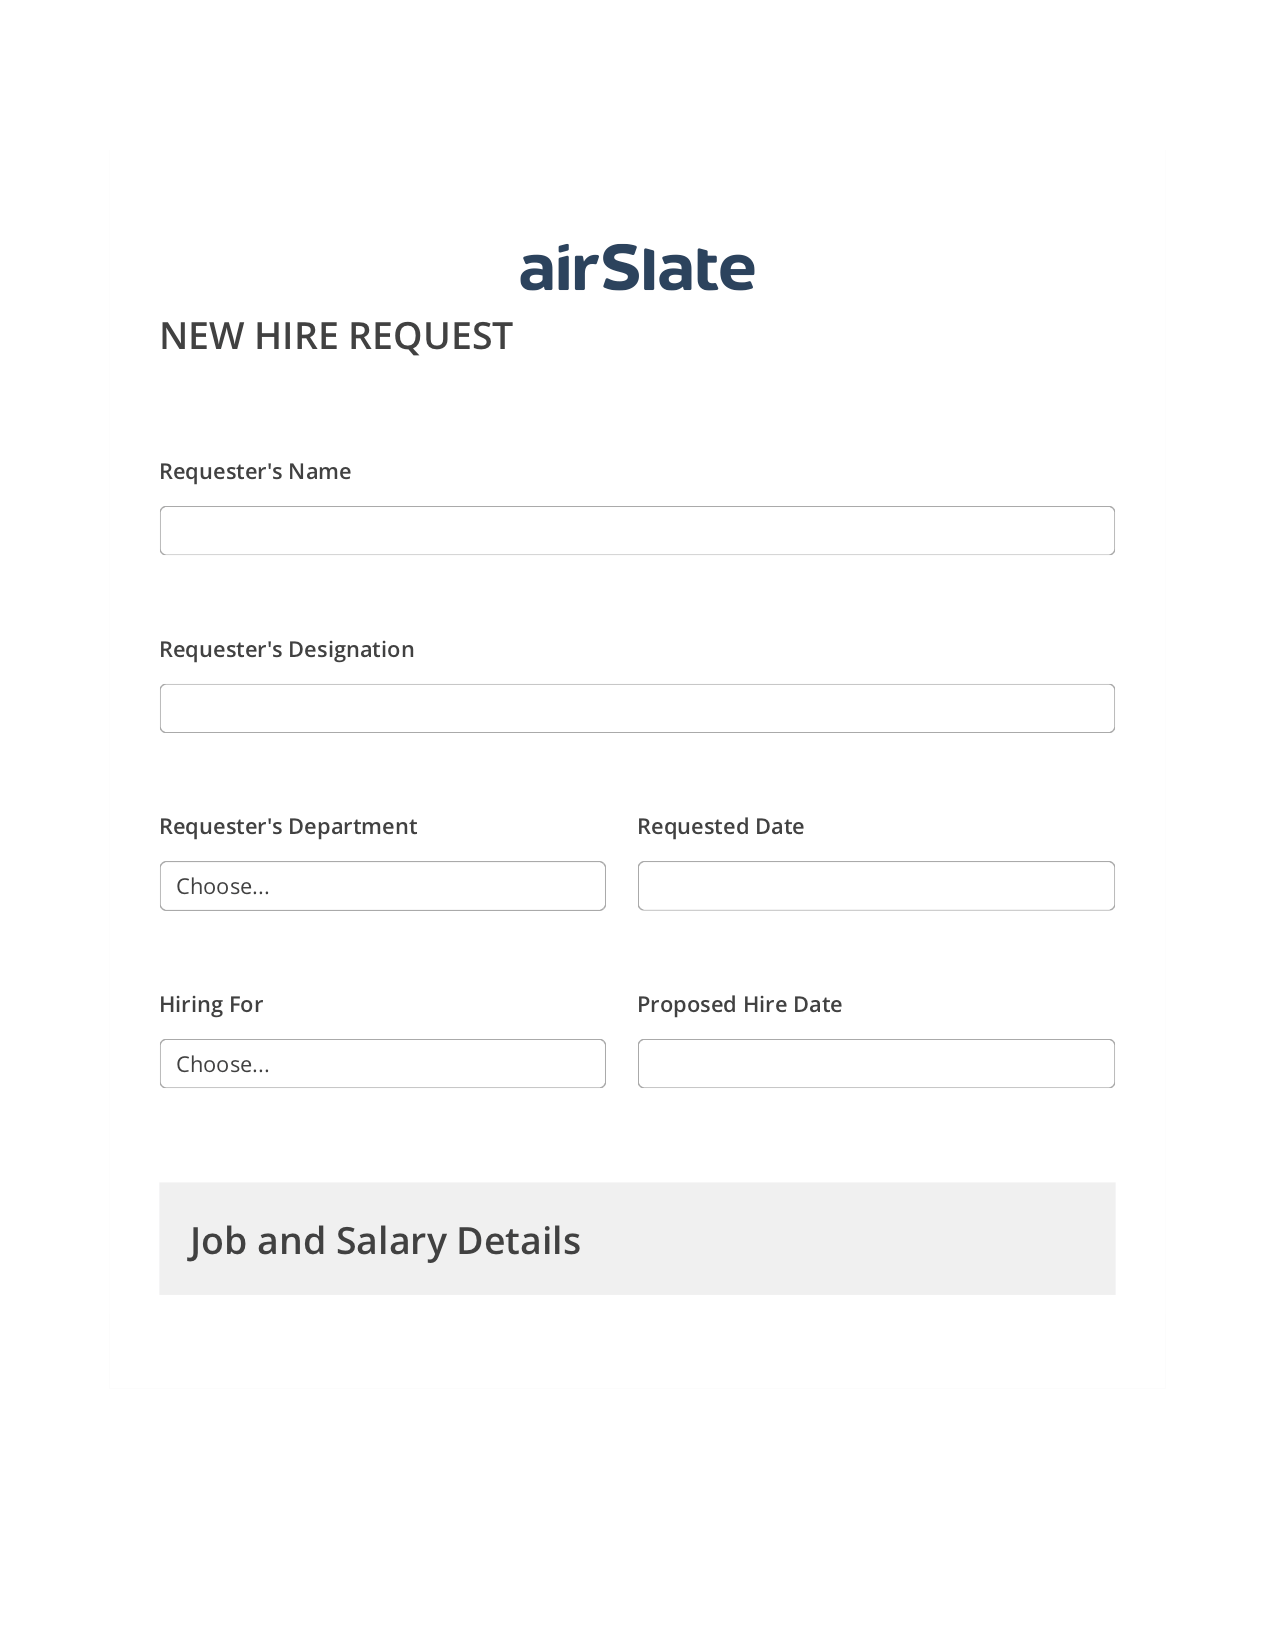 Multirole Hiring Request Workflow Pre-fill from Google Sheets Bot, Email Notification Bot, Slack Notification Postfinish Bot